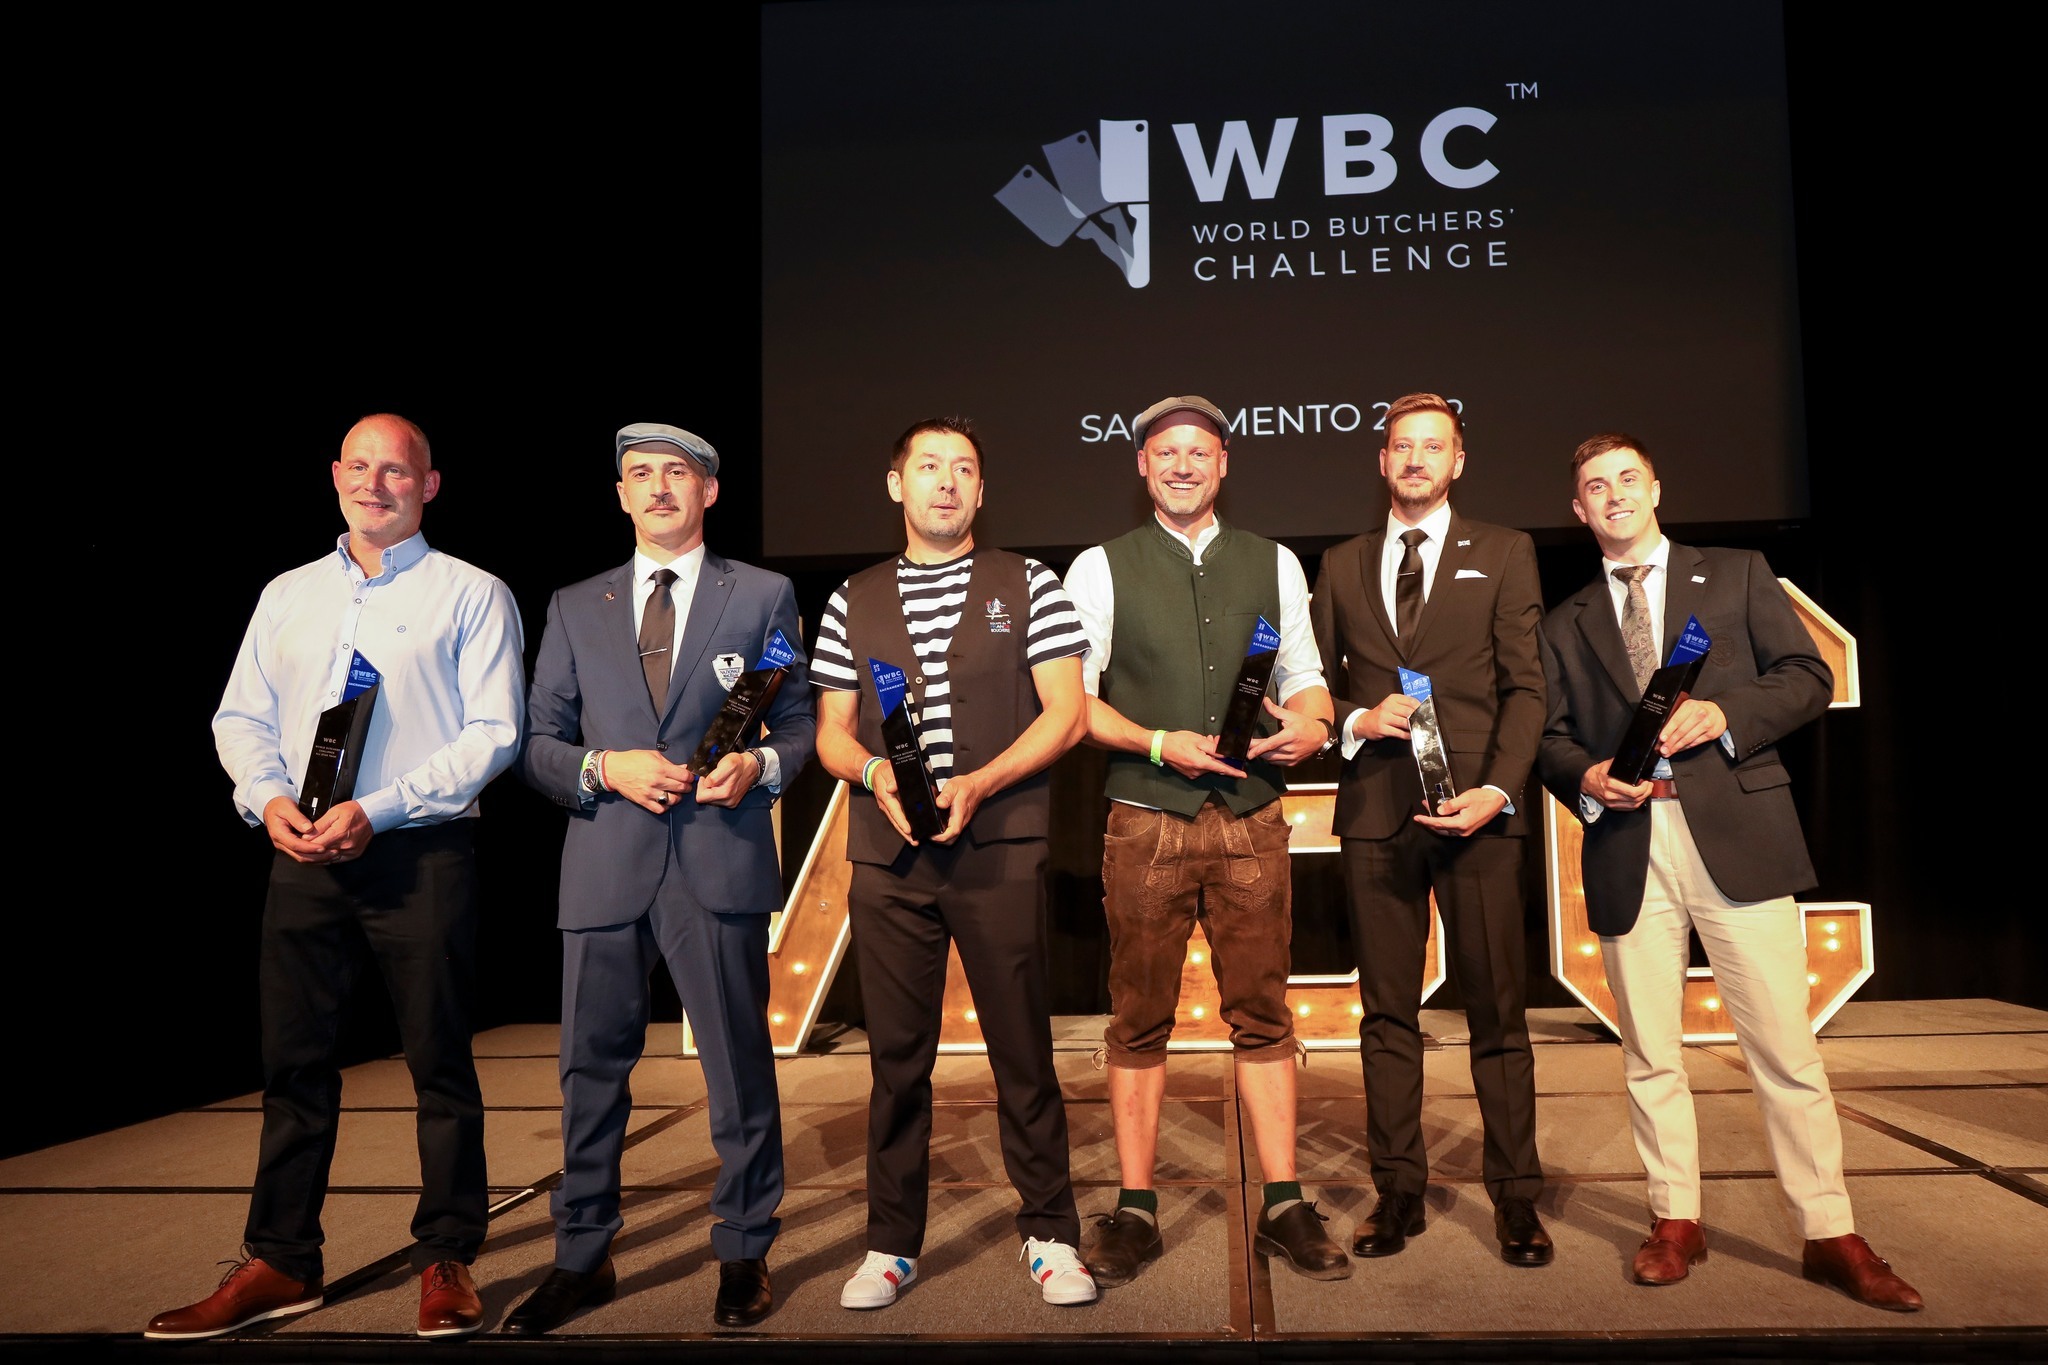 Pictured from left to right the World Butchers’ Challenge 2022 All Stars are Paul Hamilton (Ireland), Gianni Giardina (Italy), Christophe Ip Yan Fat (France), Michel Moser (Germany), Simon Taylor (GB) and Tom Bouchier (Australia). Photo: World